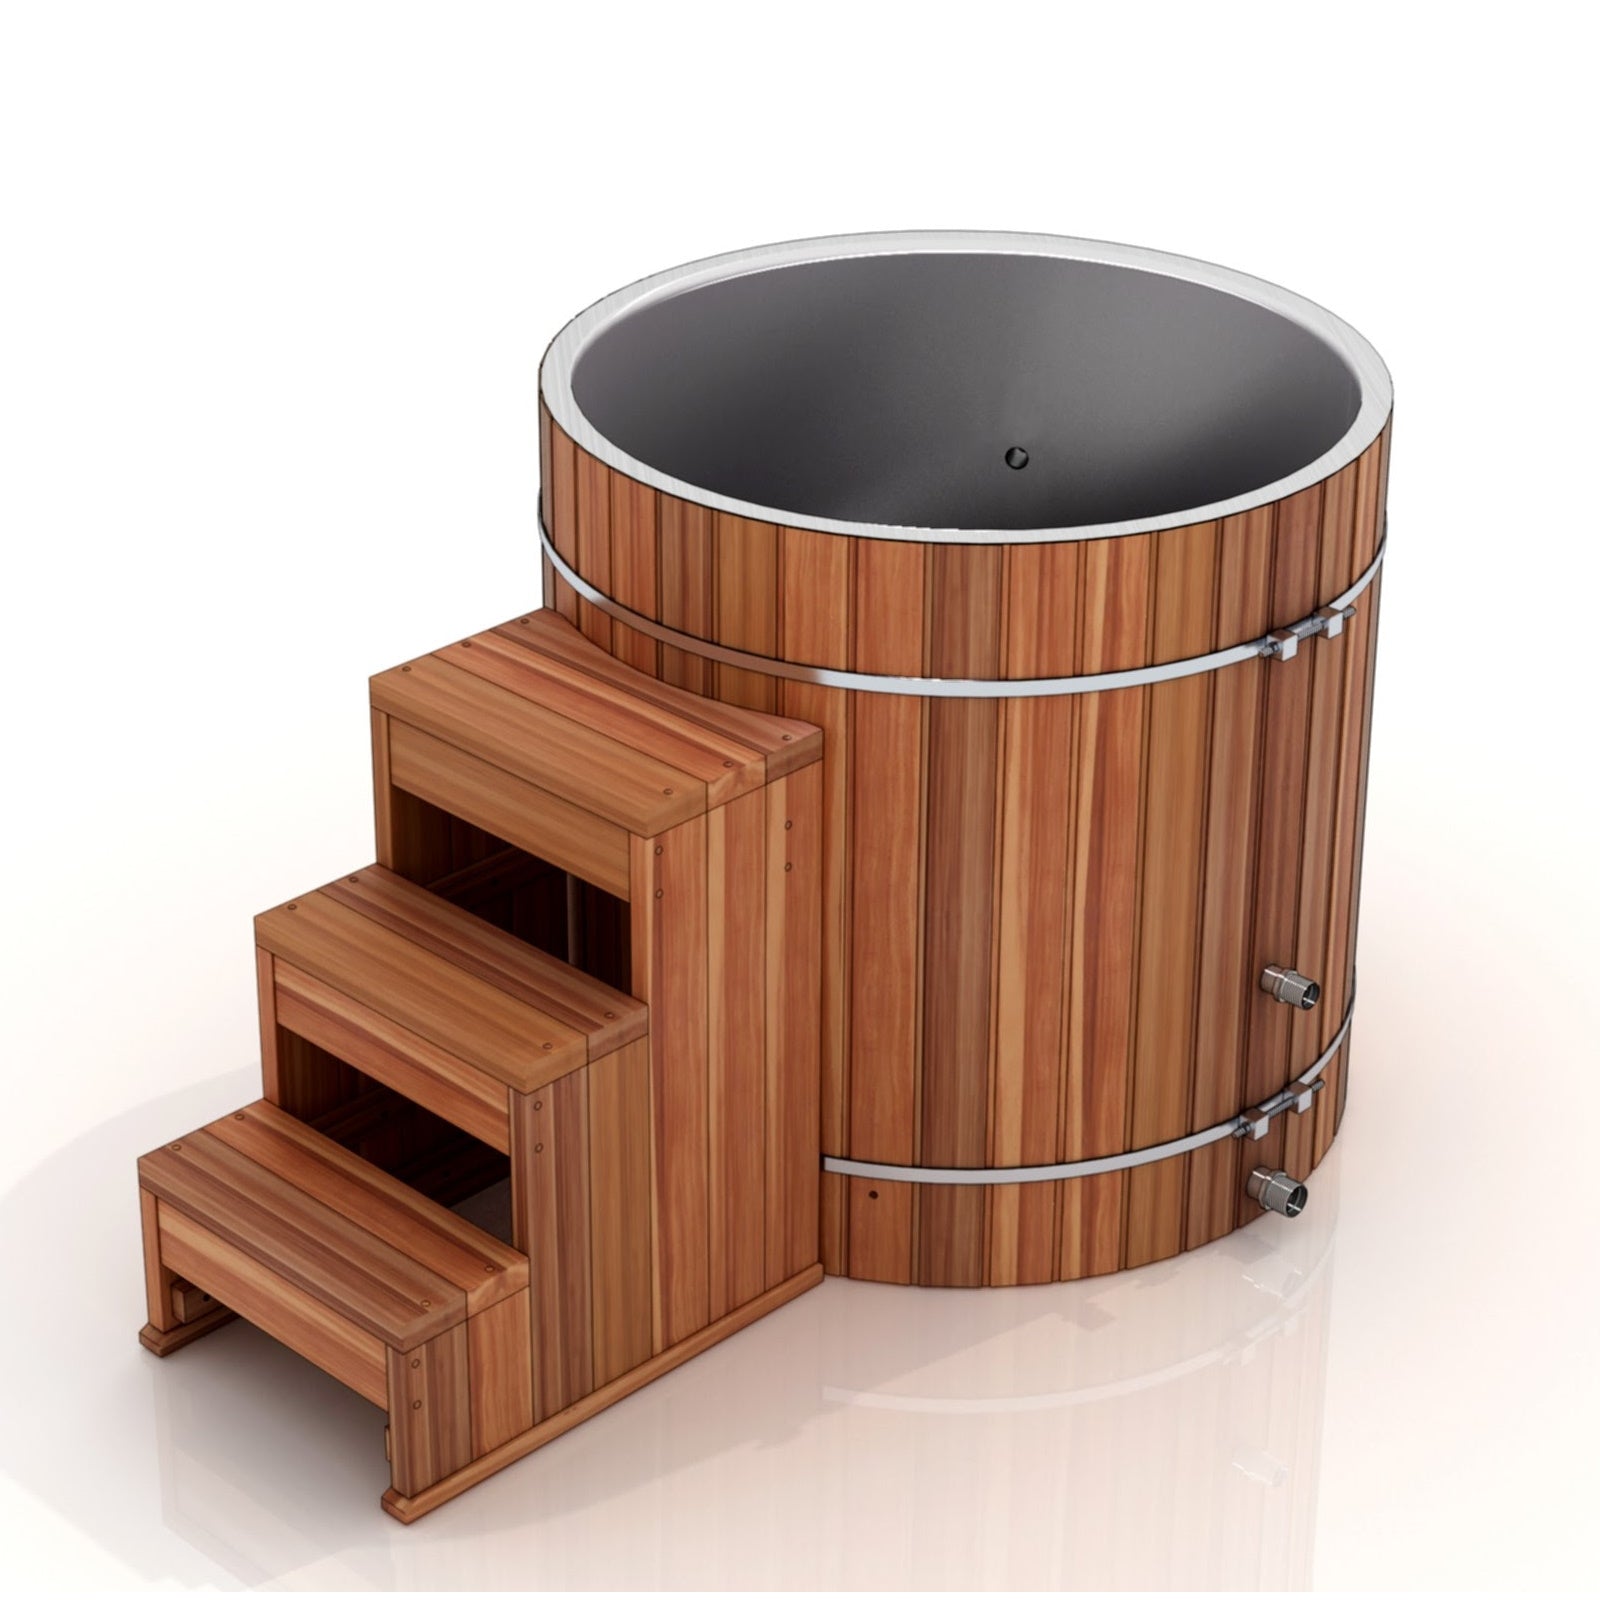 Golden Design Barrel Spa Dynamic Cold Therapy in Cedar – Stainless Steel Tub with WiFi Thermal System Kit